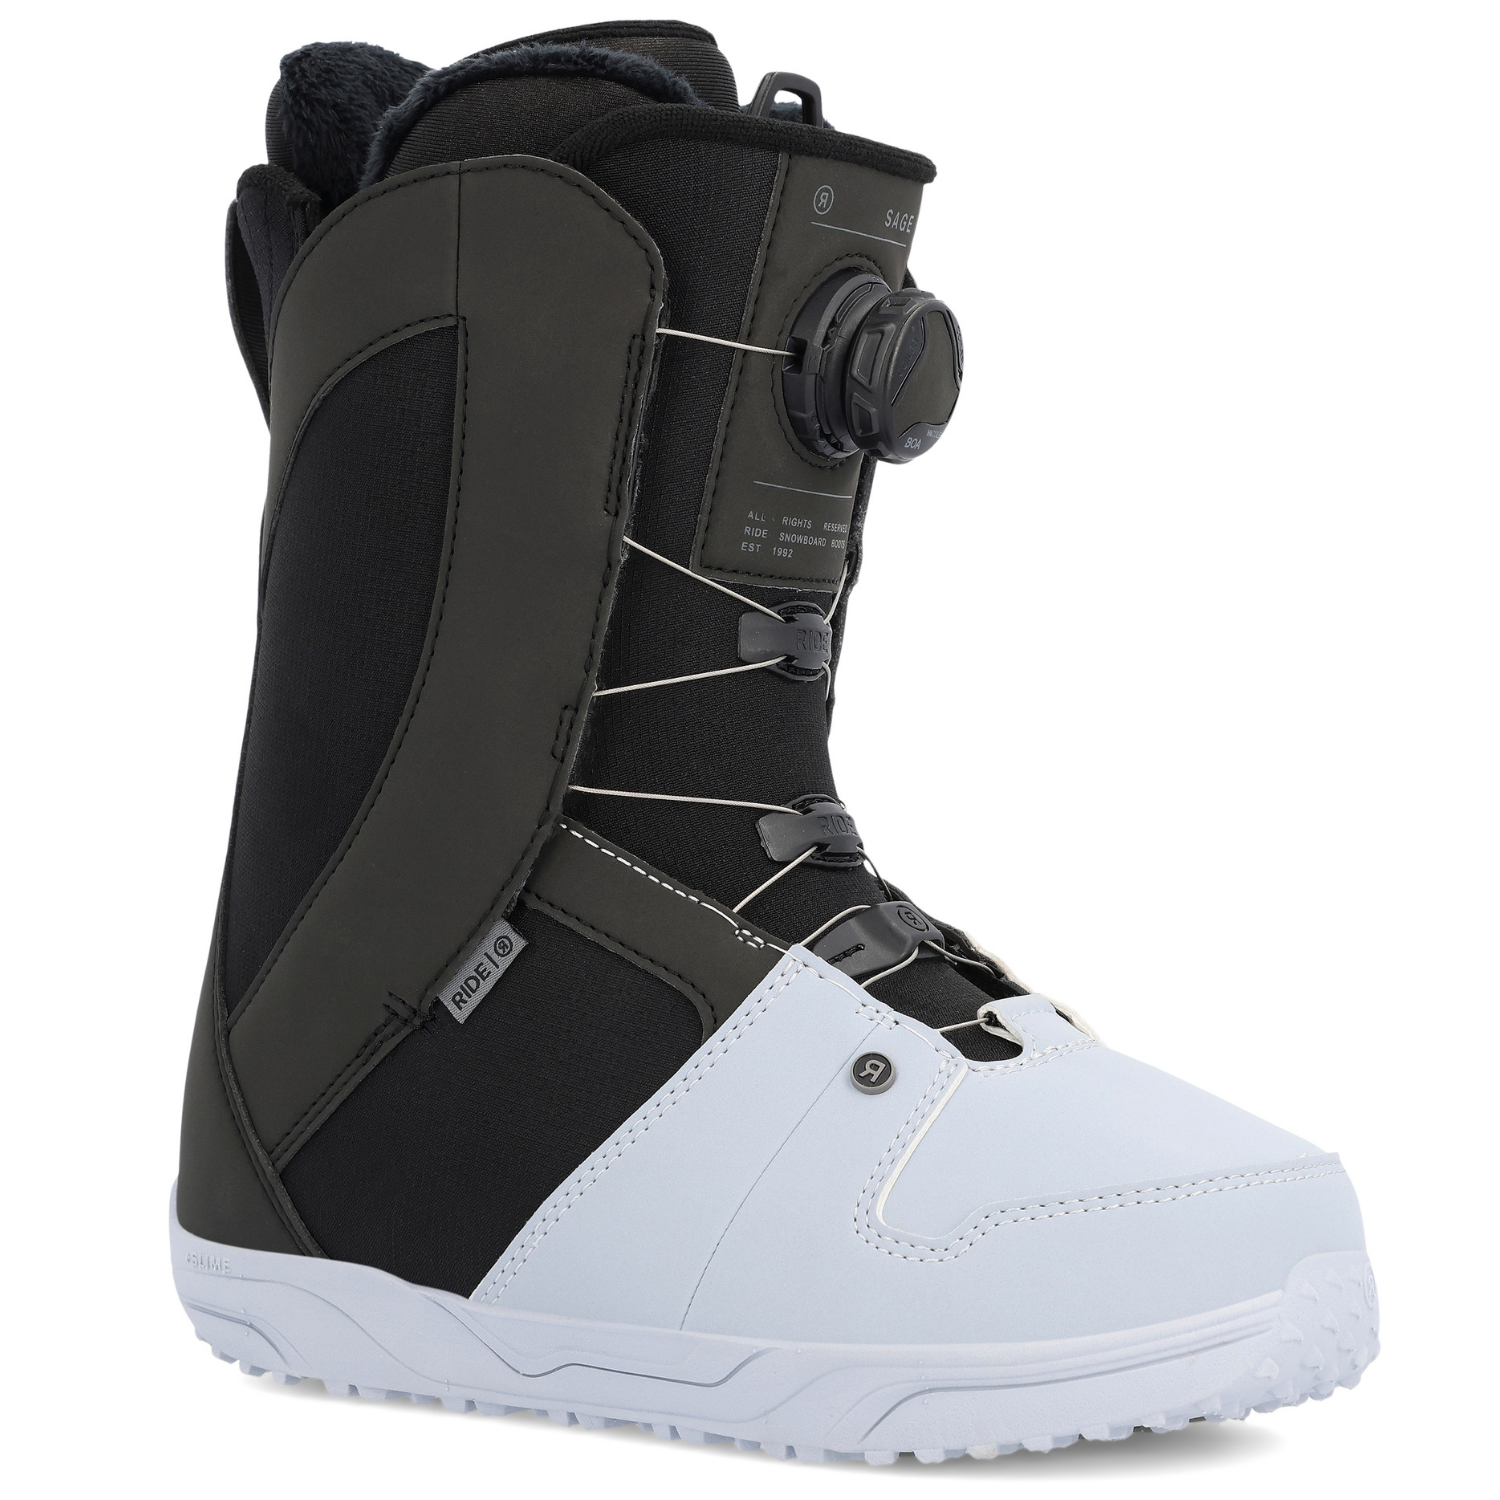 2023 Ride Sage Womens Snowboarding Boots For Sale